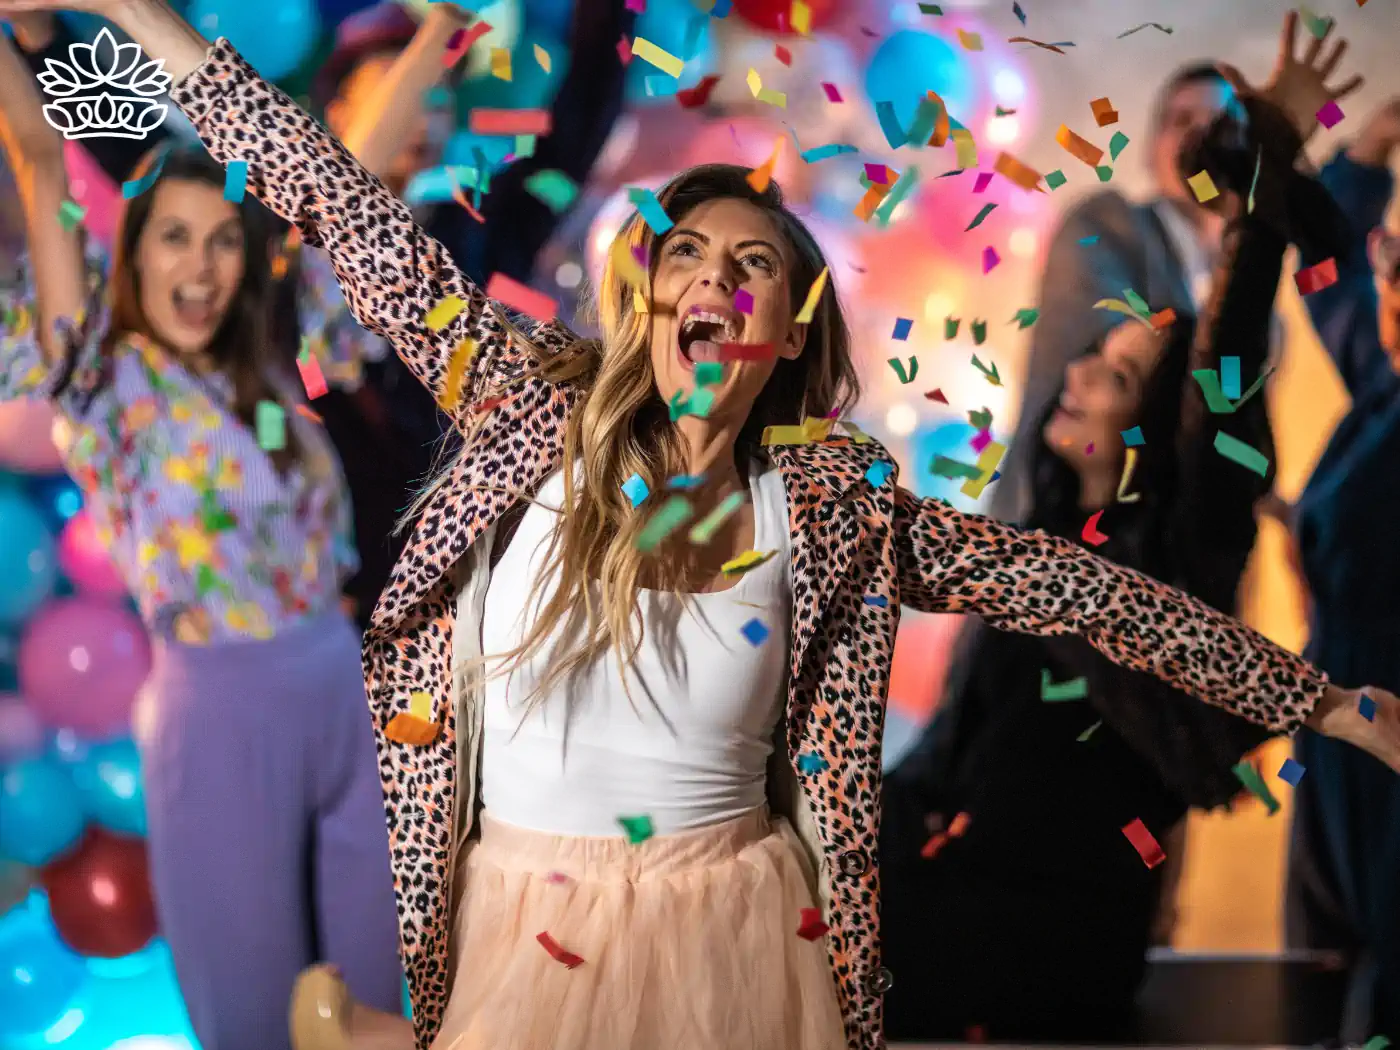 A joyful party scene with confetti and a woman celebrating energetically - Fabulous Flowers and Gifts.